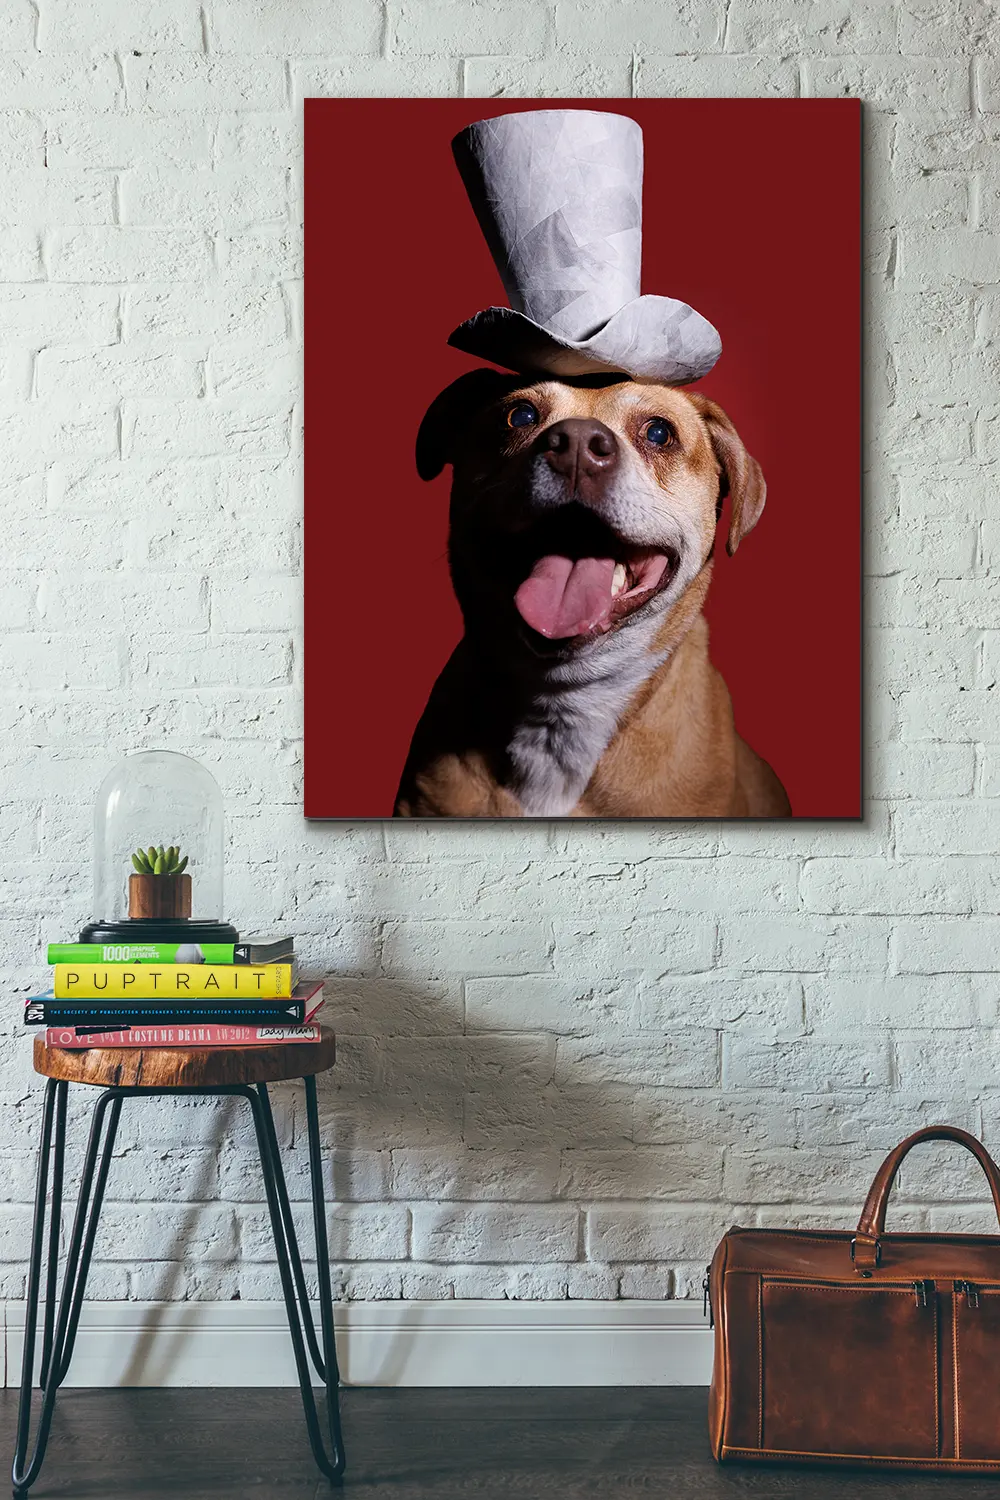 Large print portrait of a smiling dog against a red background wearing a white top hat